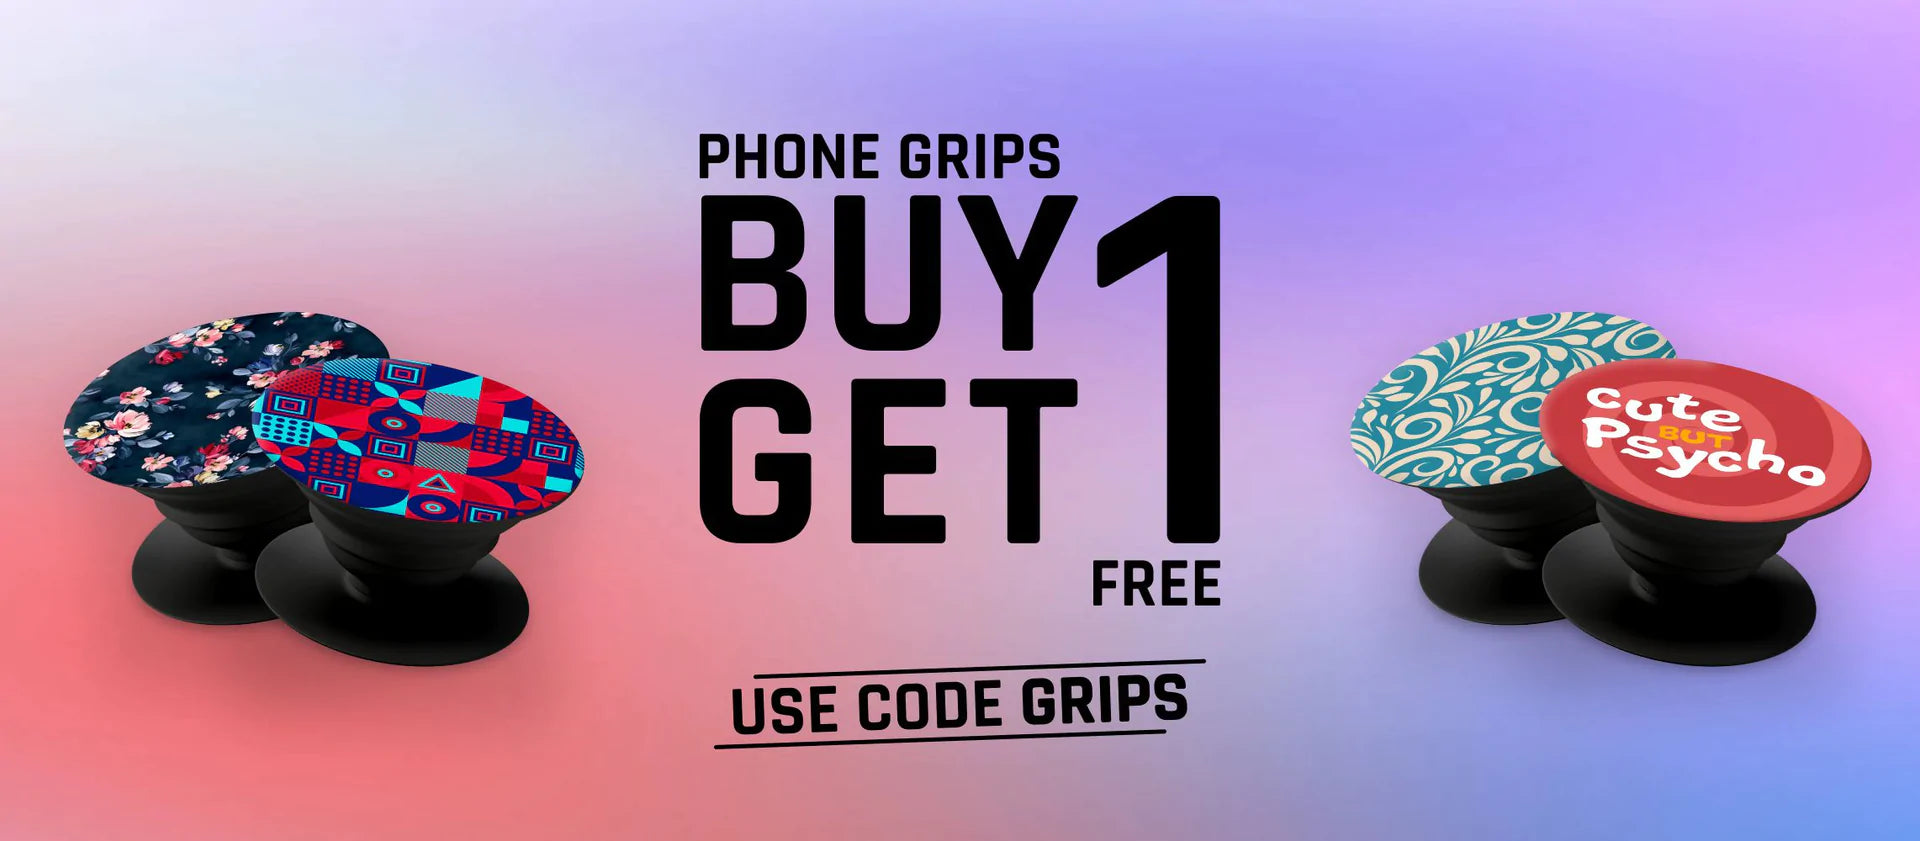 wrapcart sale coupon code of Buy 1 Get 1 on mobile grips